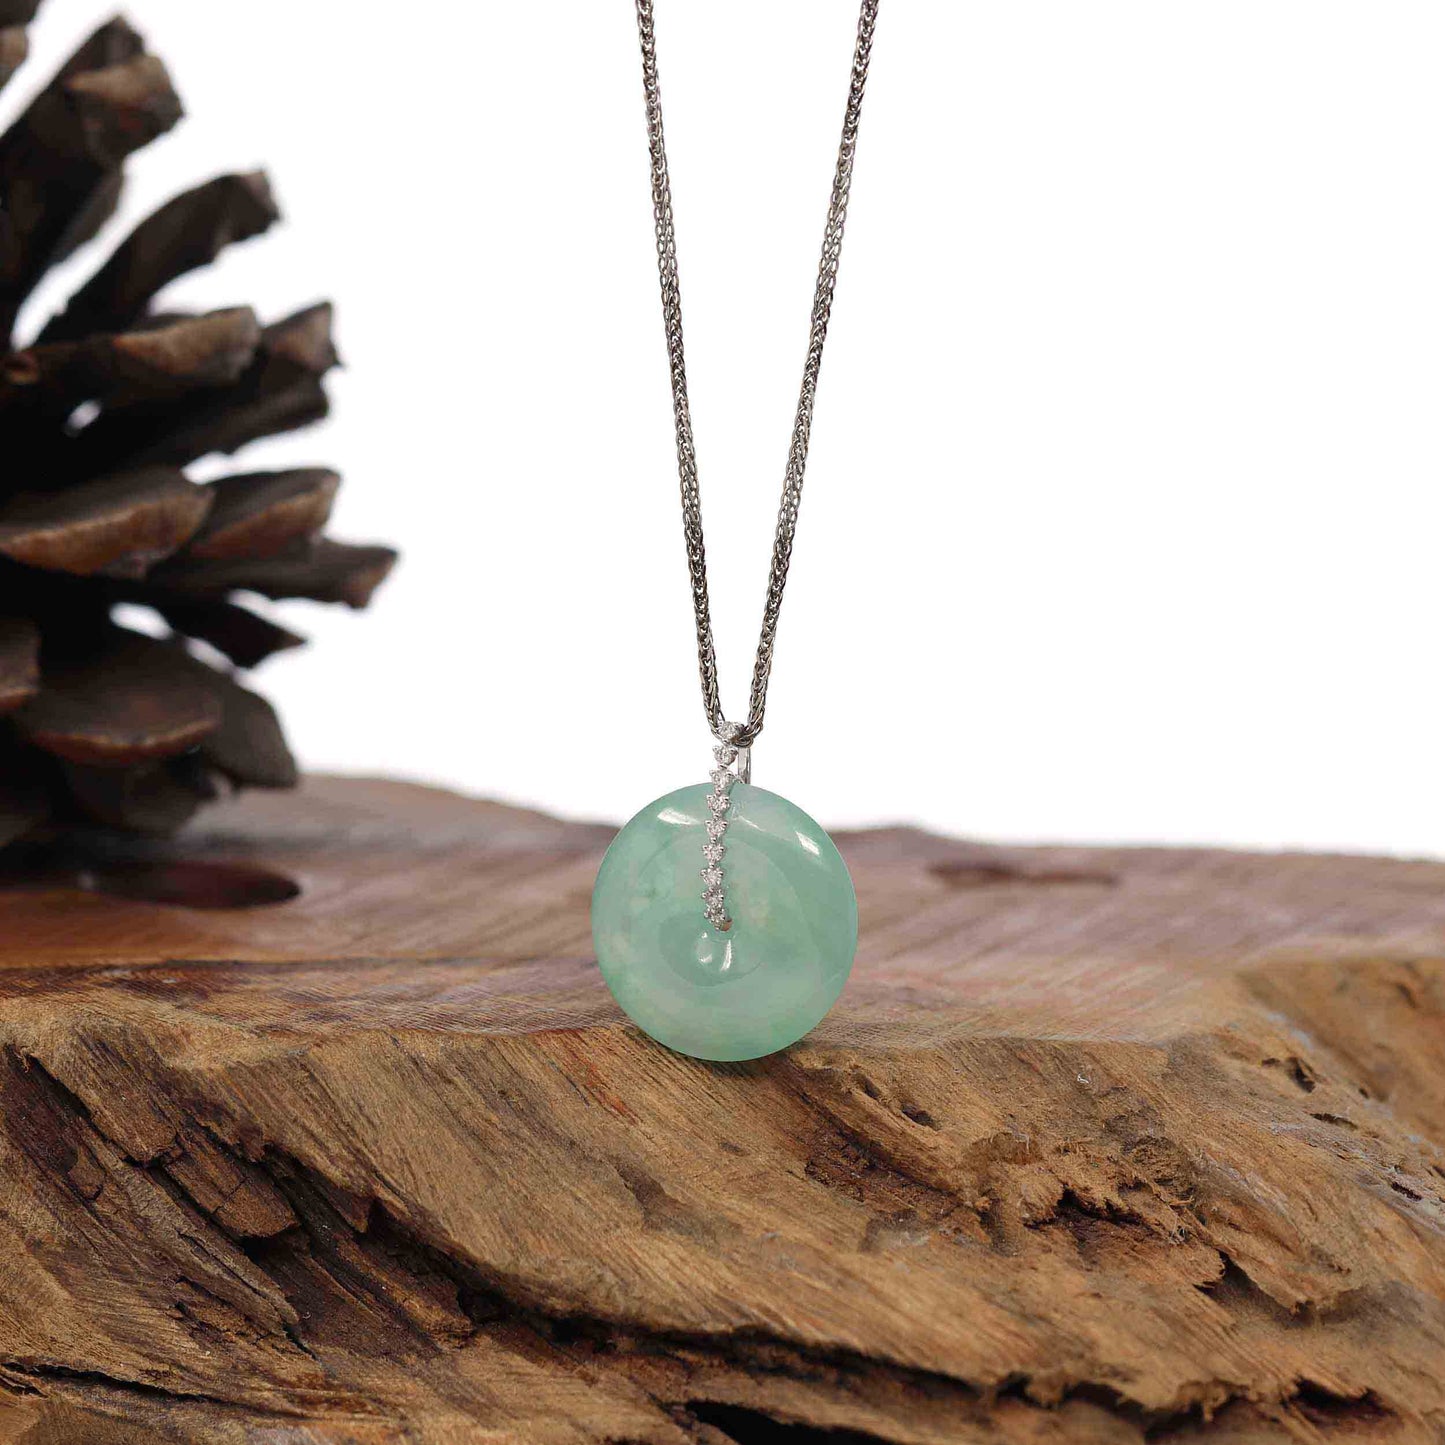 RealJade® Co. Gold Jadeite Jade Pendant Necklace 18K White Gold "Good Luck Button" Necklace Ice Green Jadeite Jade Pendant Necklace